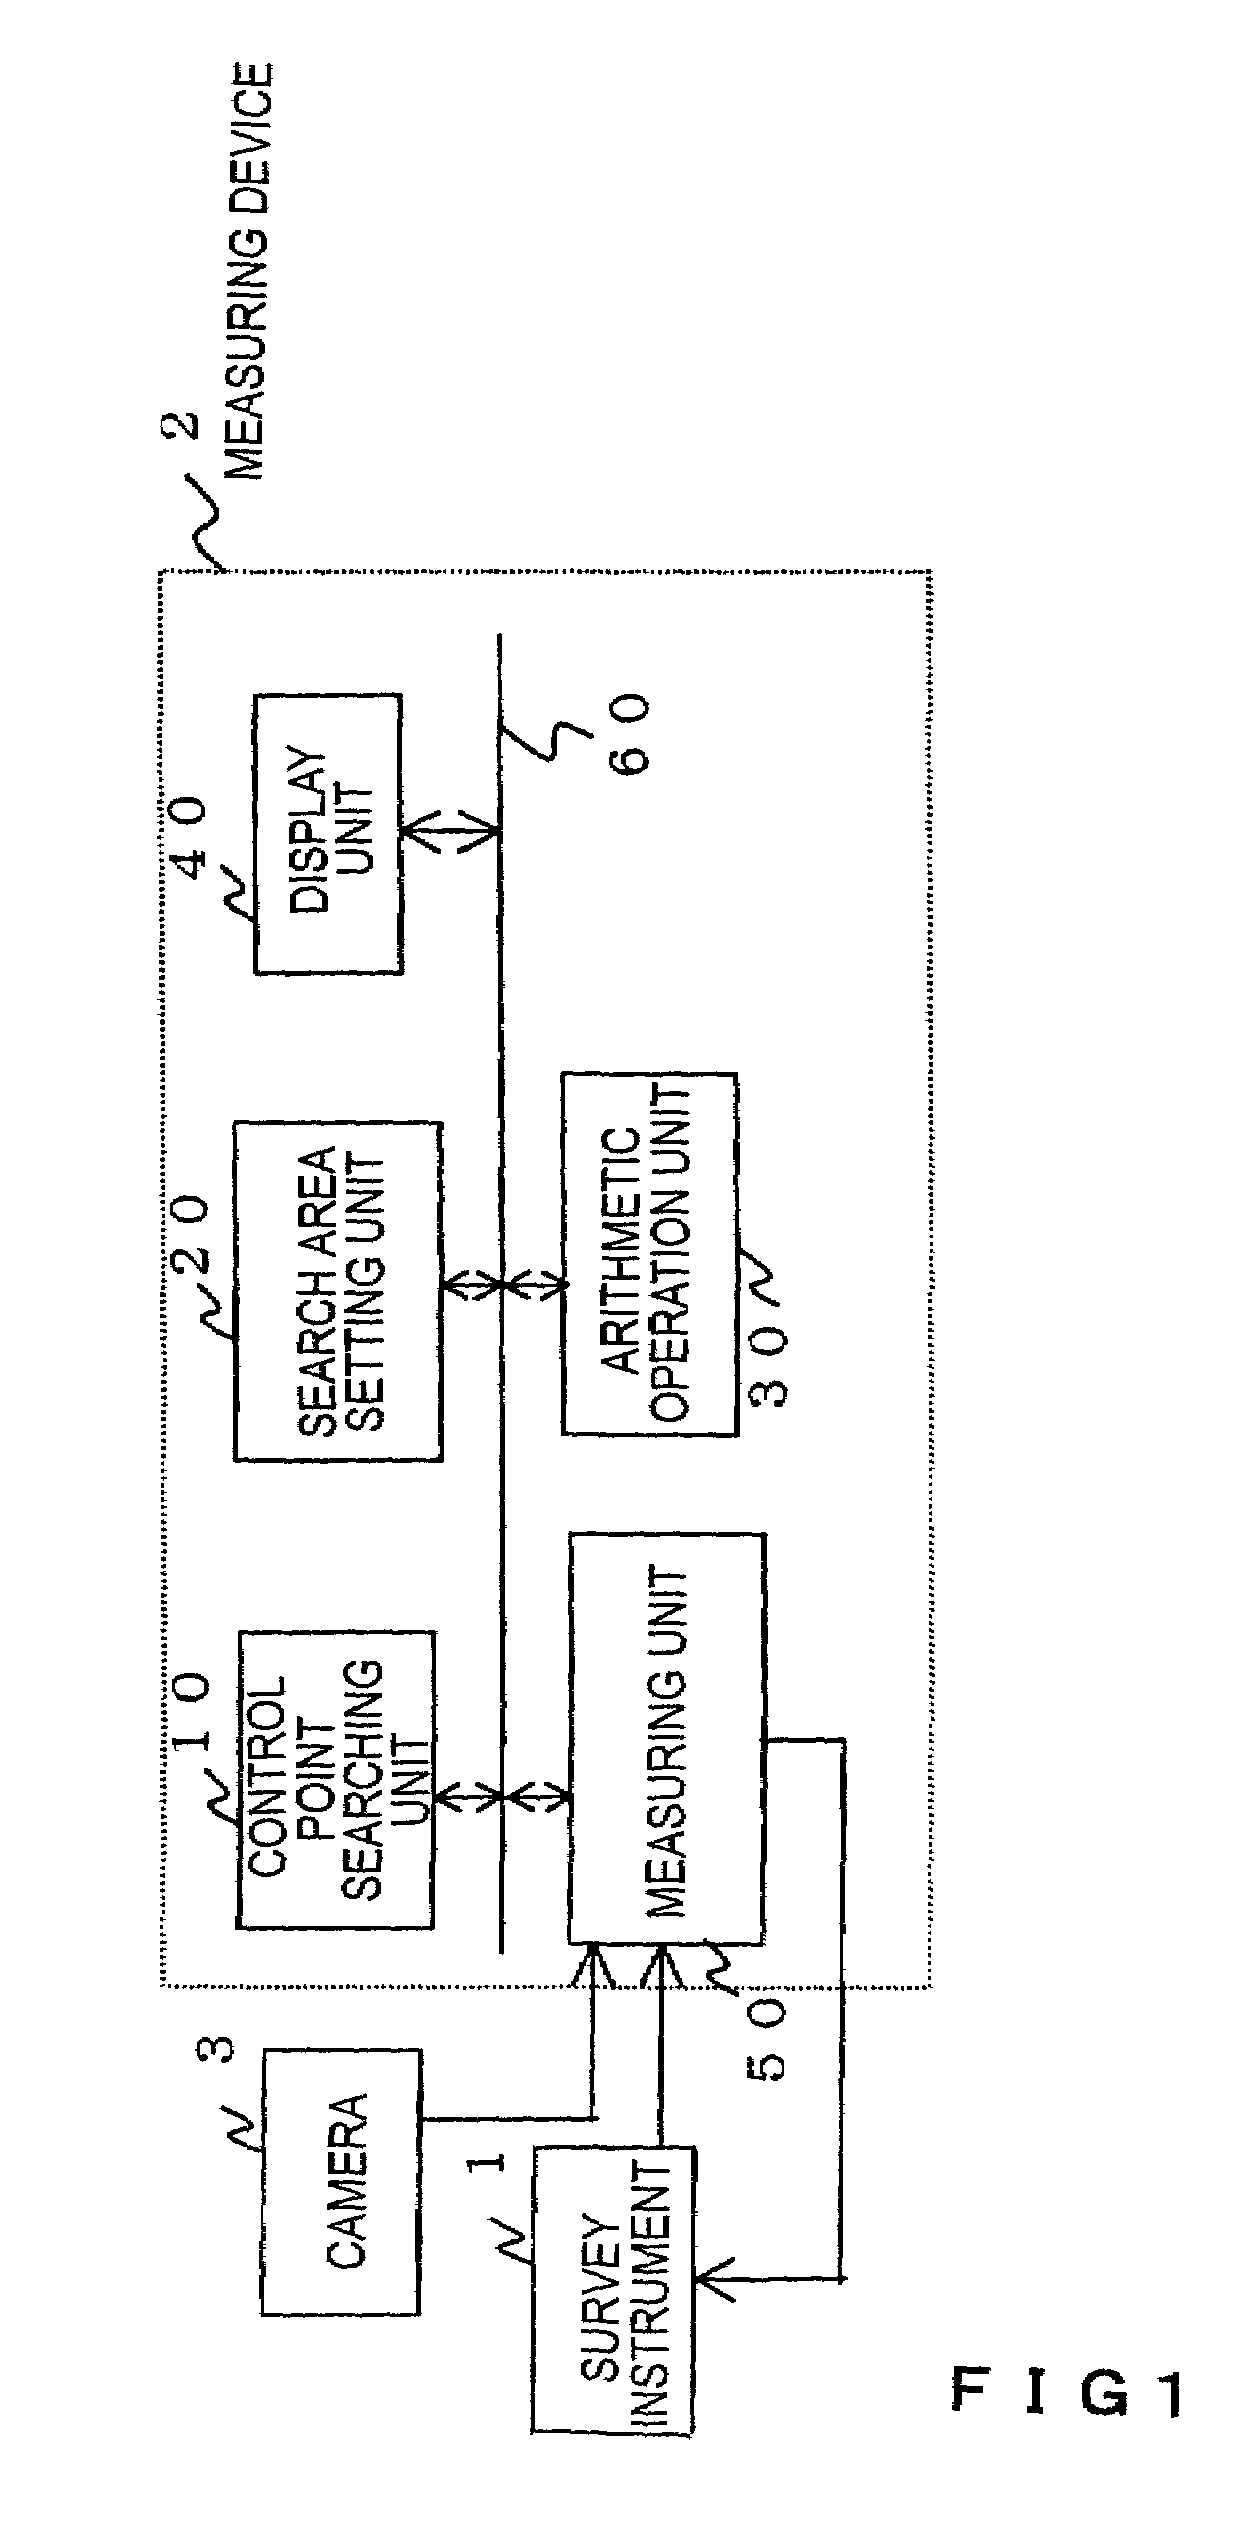 Stereo image measuring device